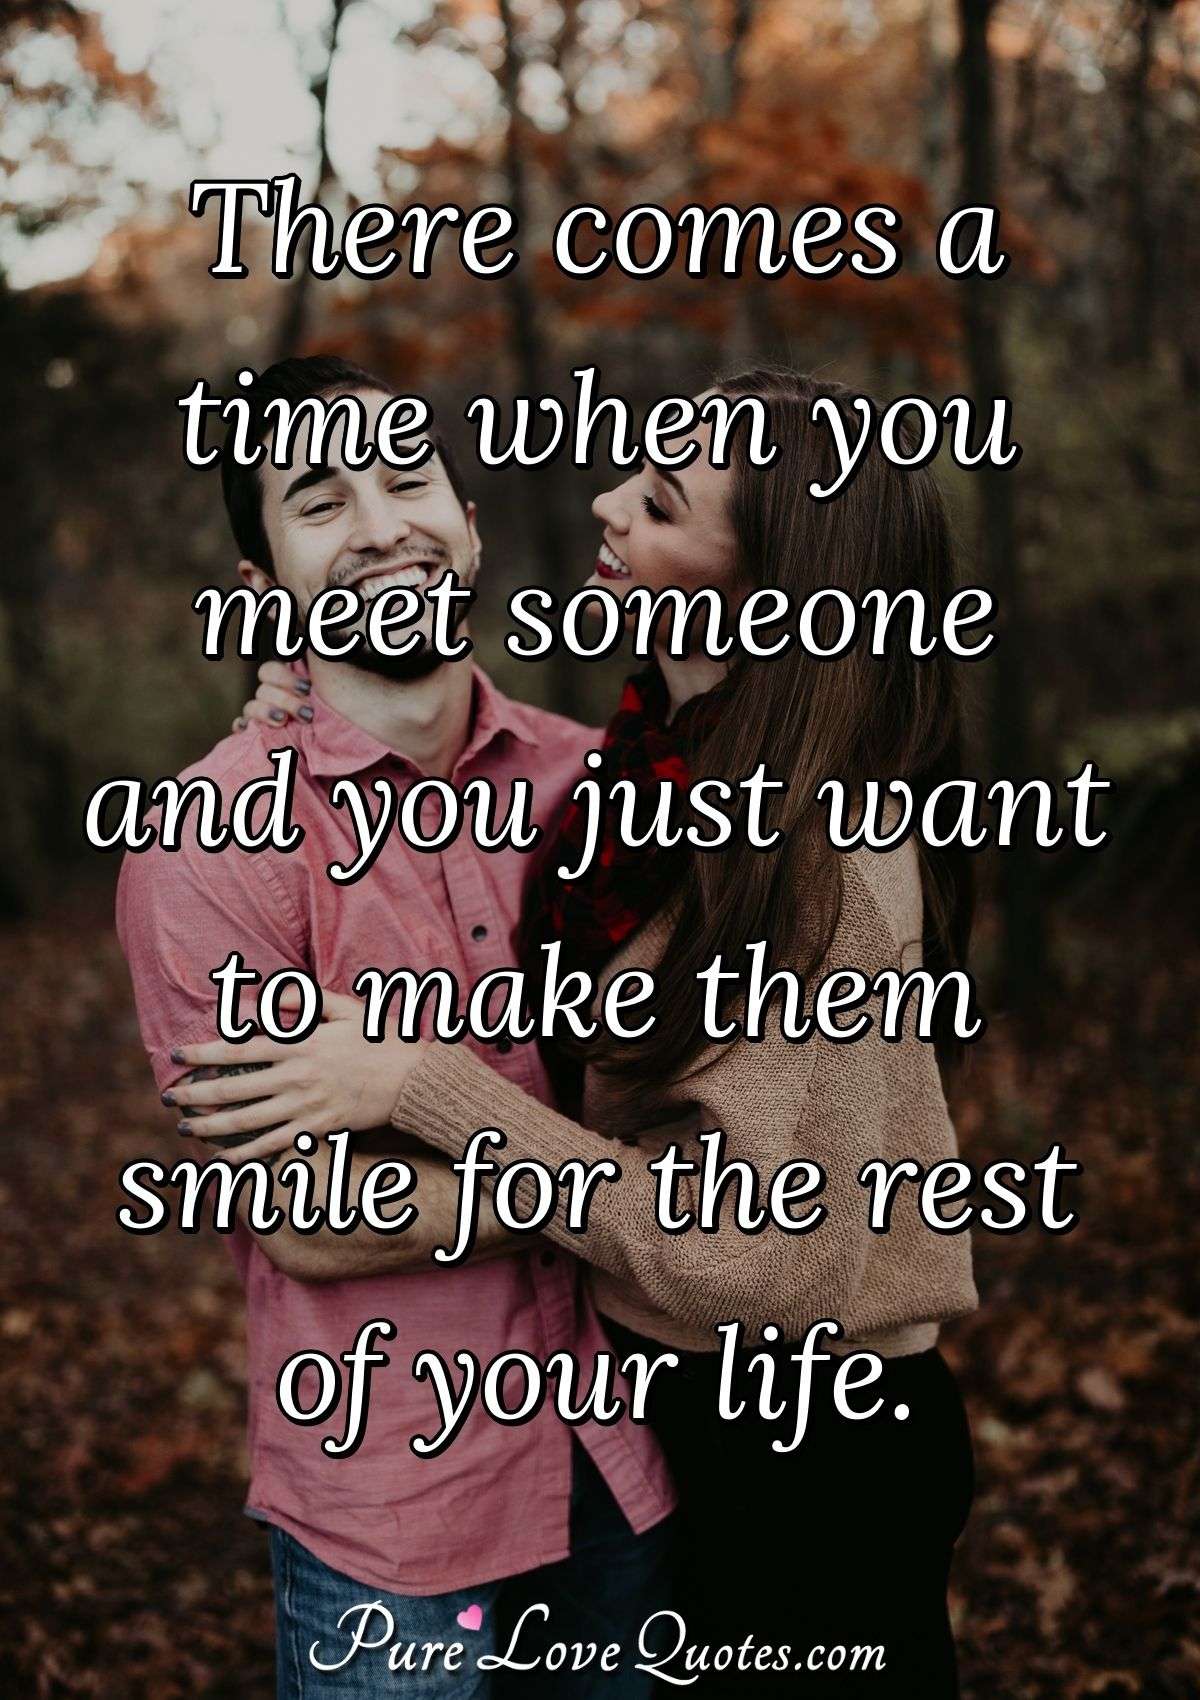 There comes a time when you meet someone and you just want to make them smile for the rest of your life. - Anonymous